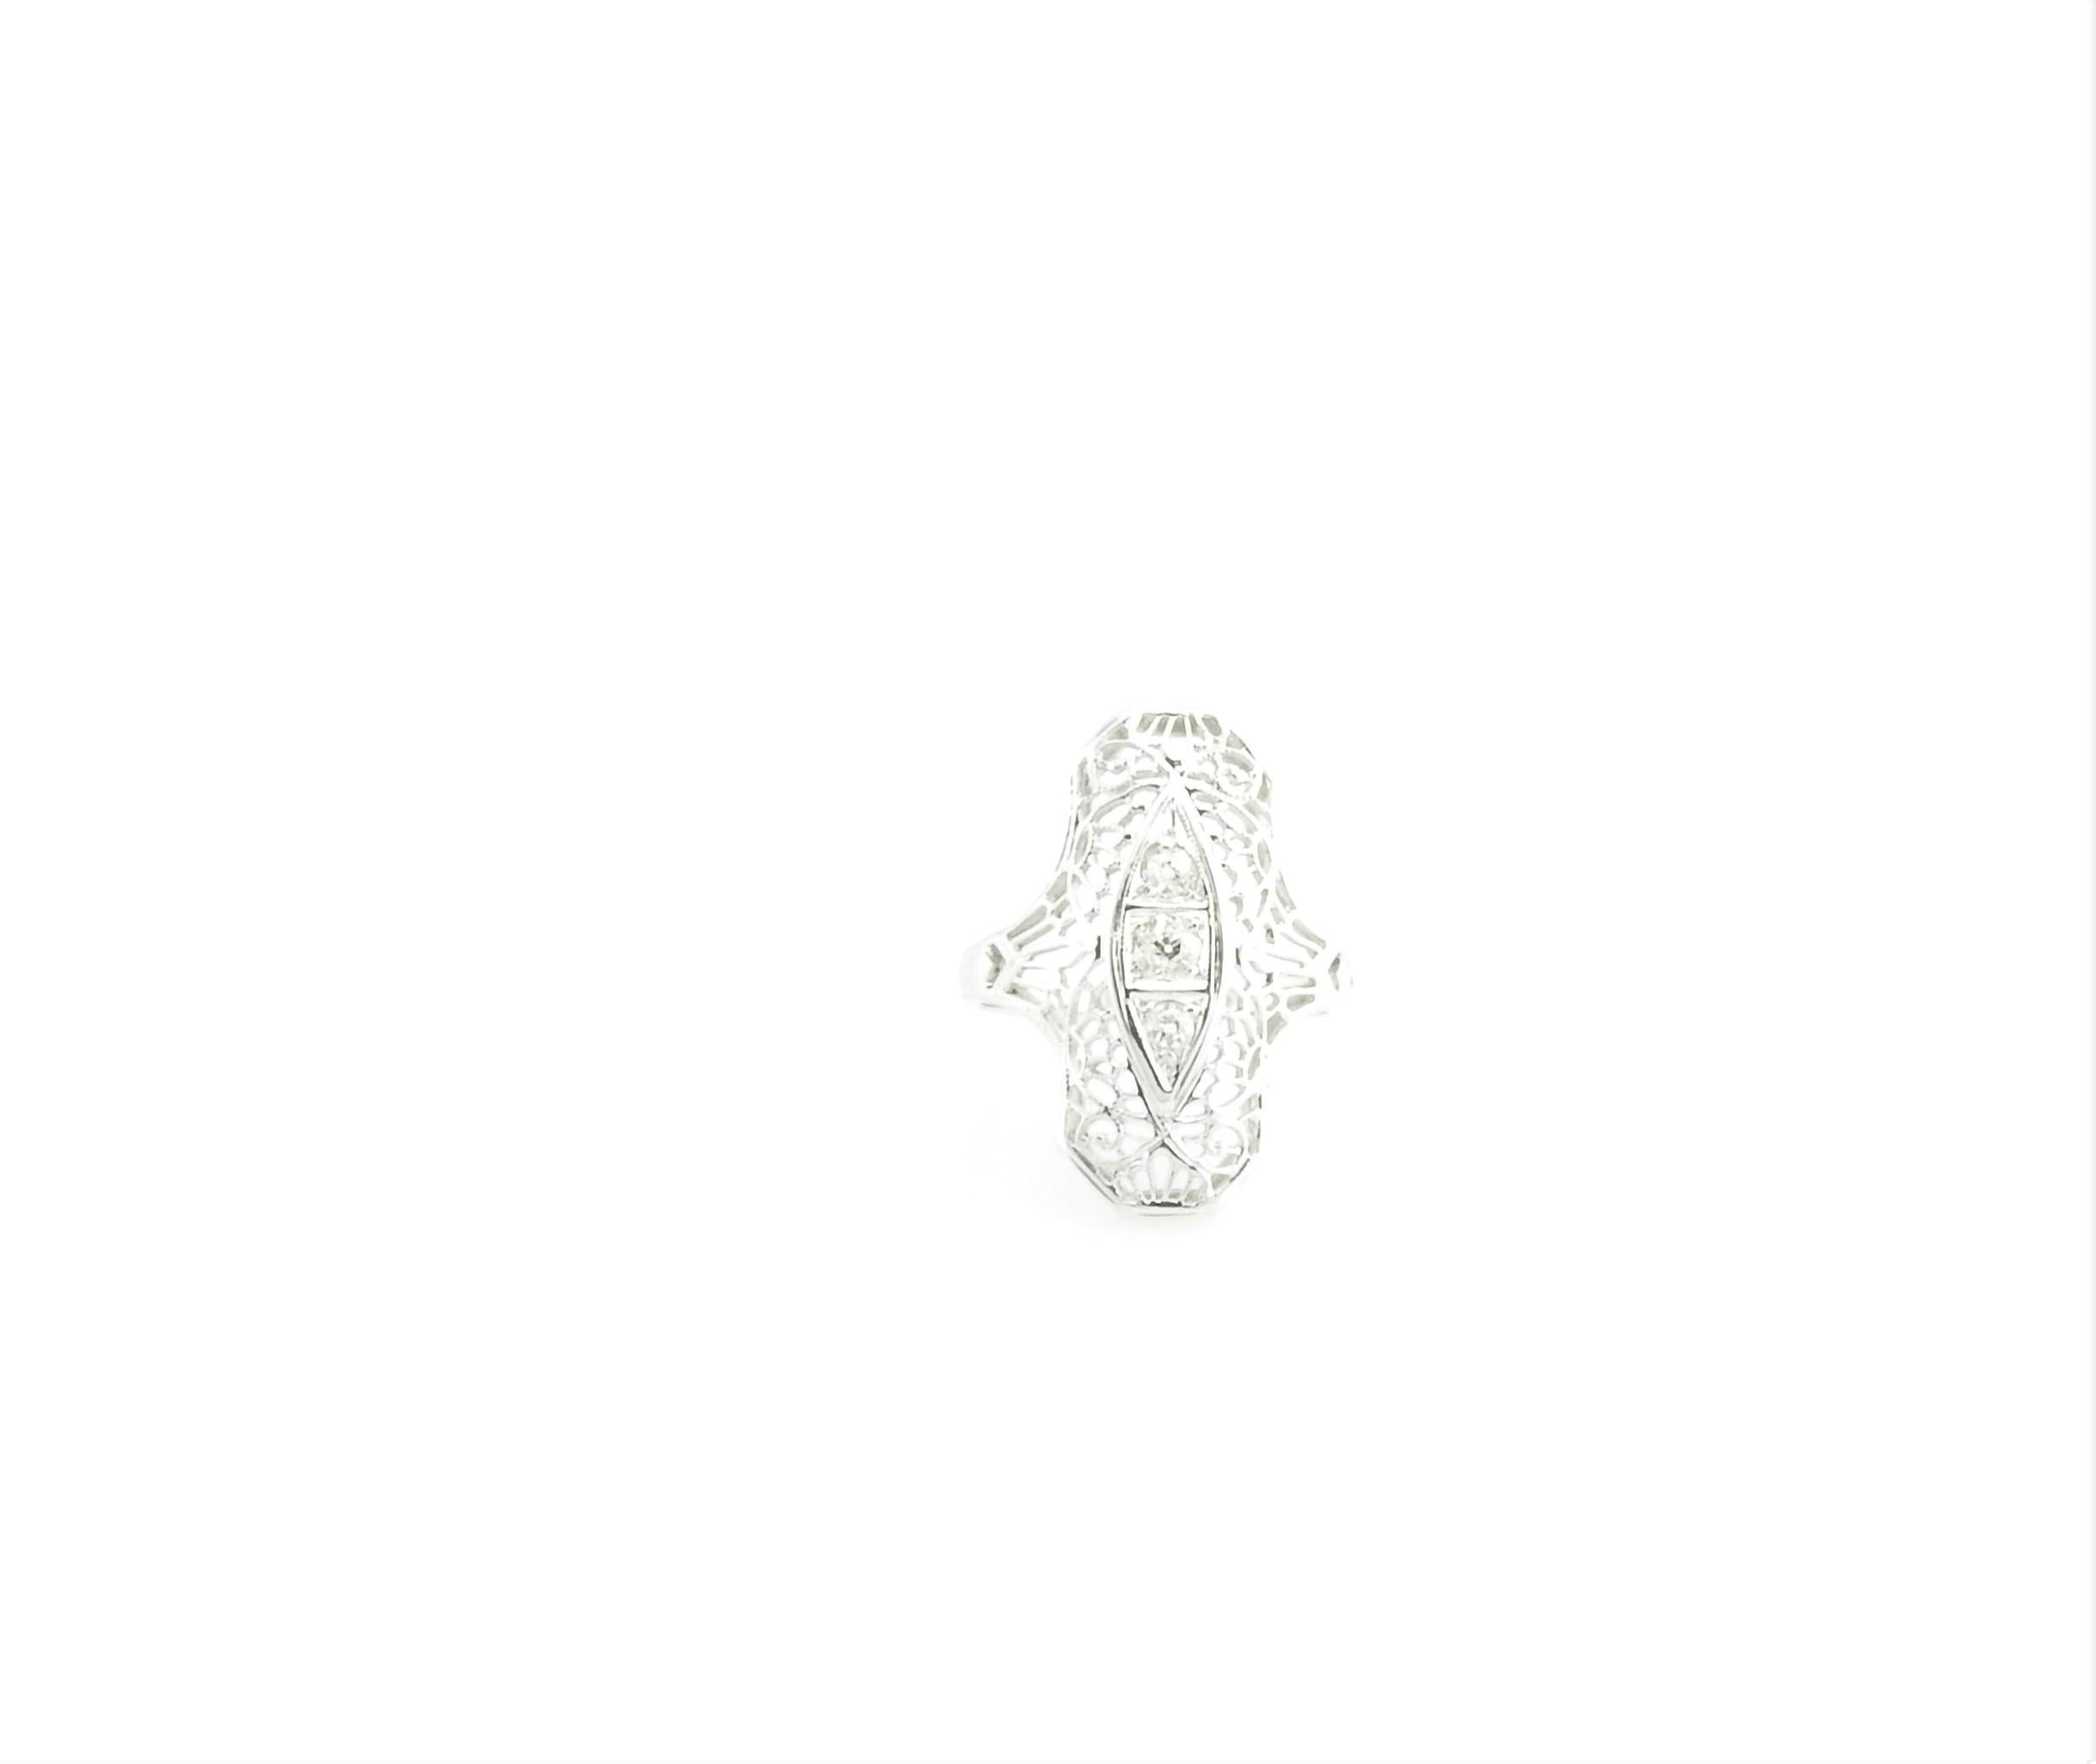 Vintage 18 Karat White Gold Filigree and Diamond Ring Size 4

This lovely ring features three round old mine cut diamonds set in beautifully detailed 18K white gold filigree.

Top of ring measures 22 mm x 13 mm. Shank measures 2 mm.

Approximate